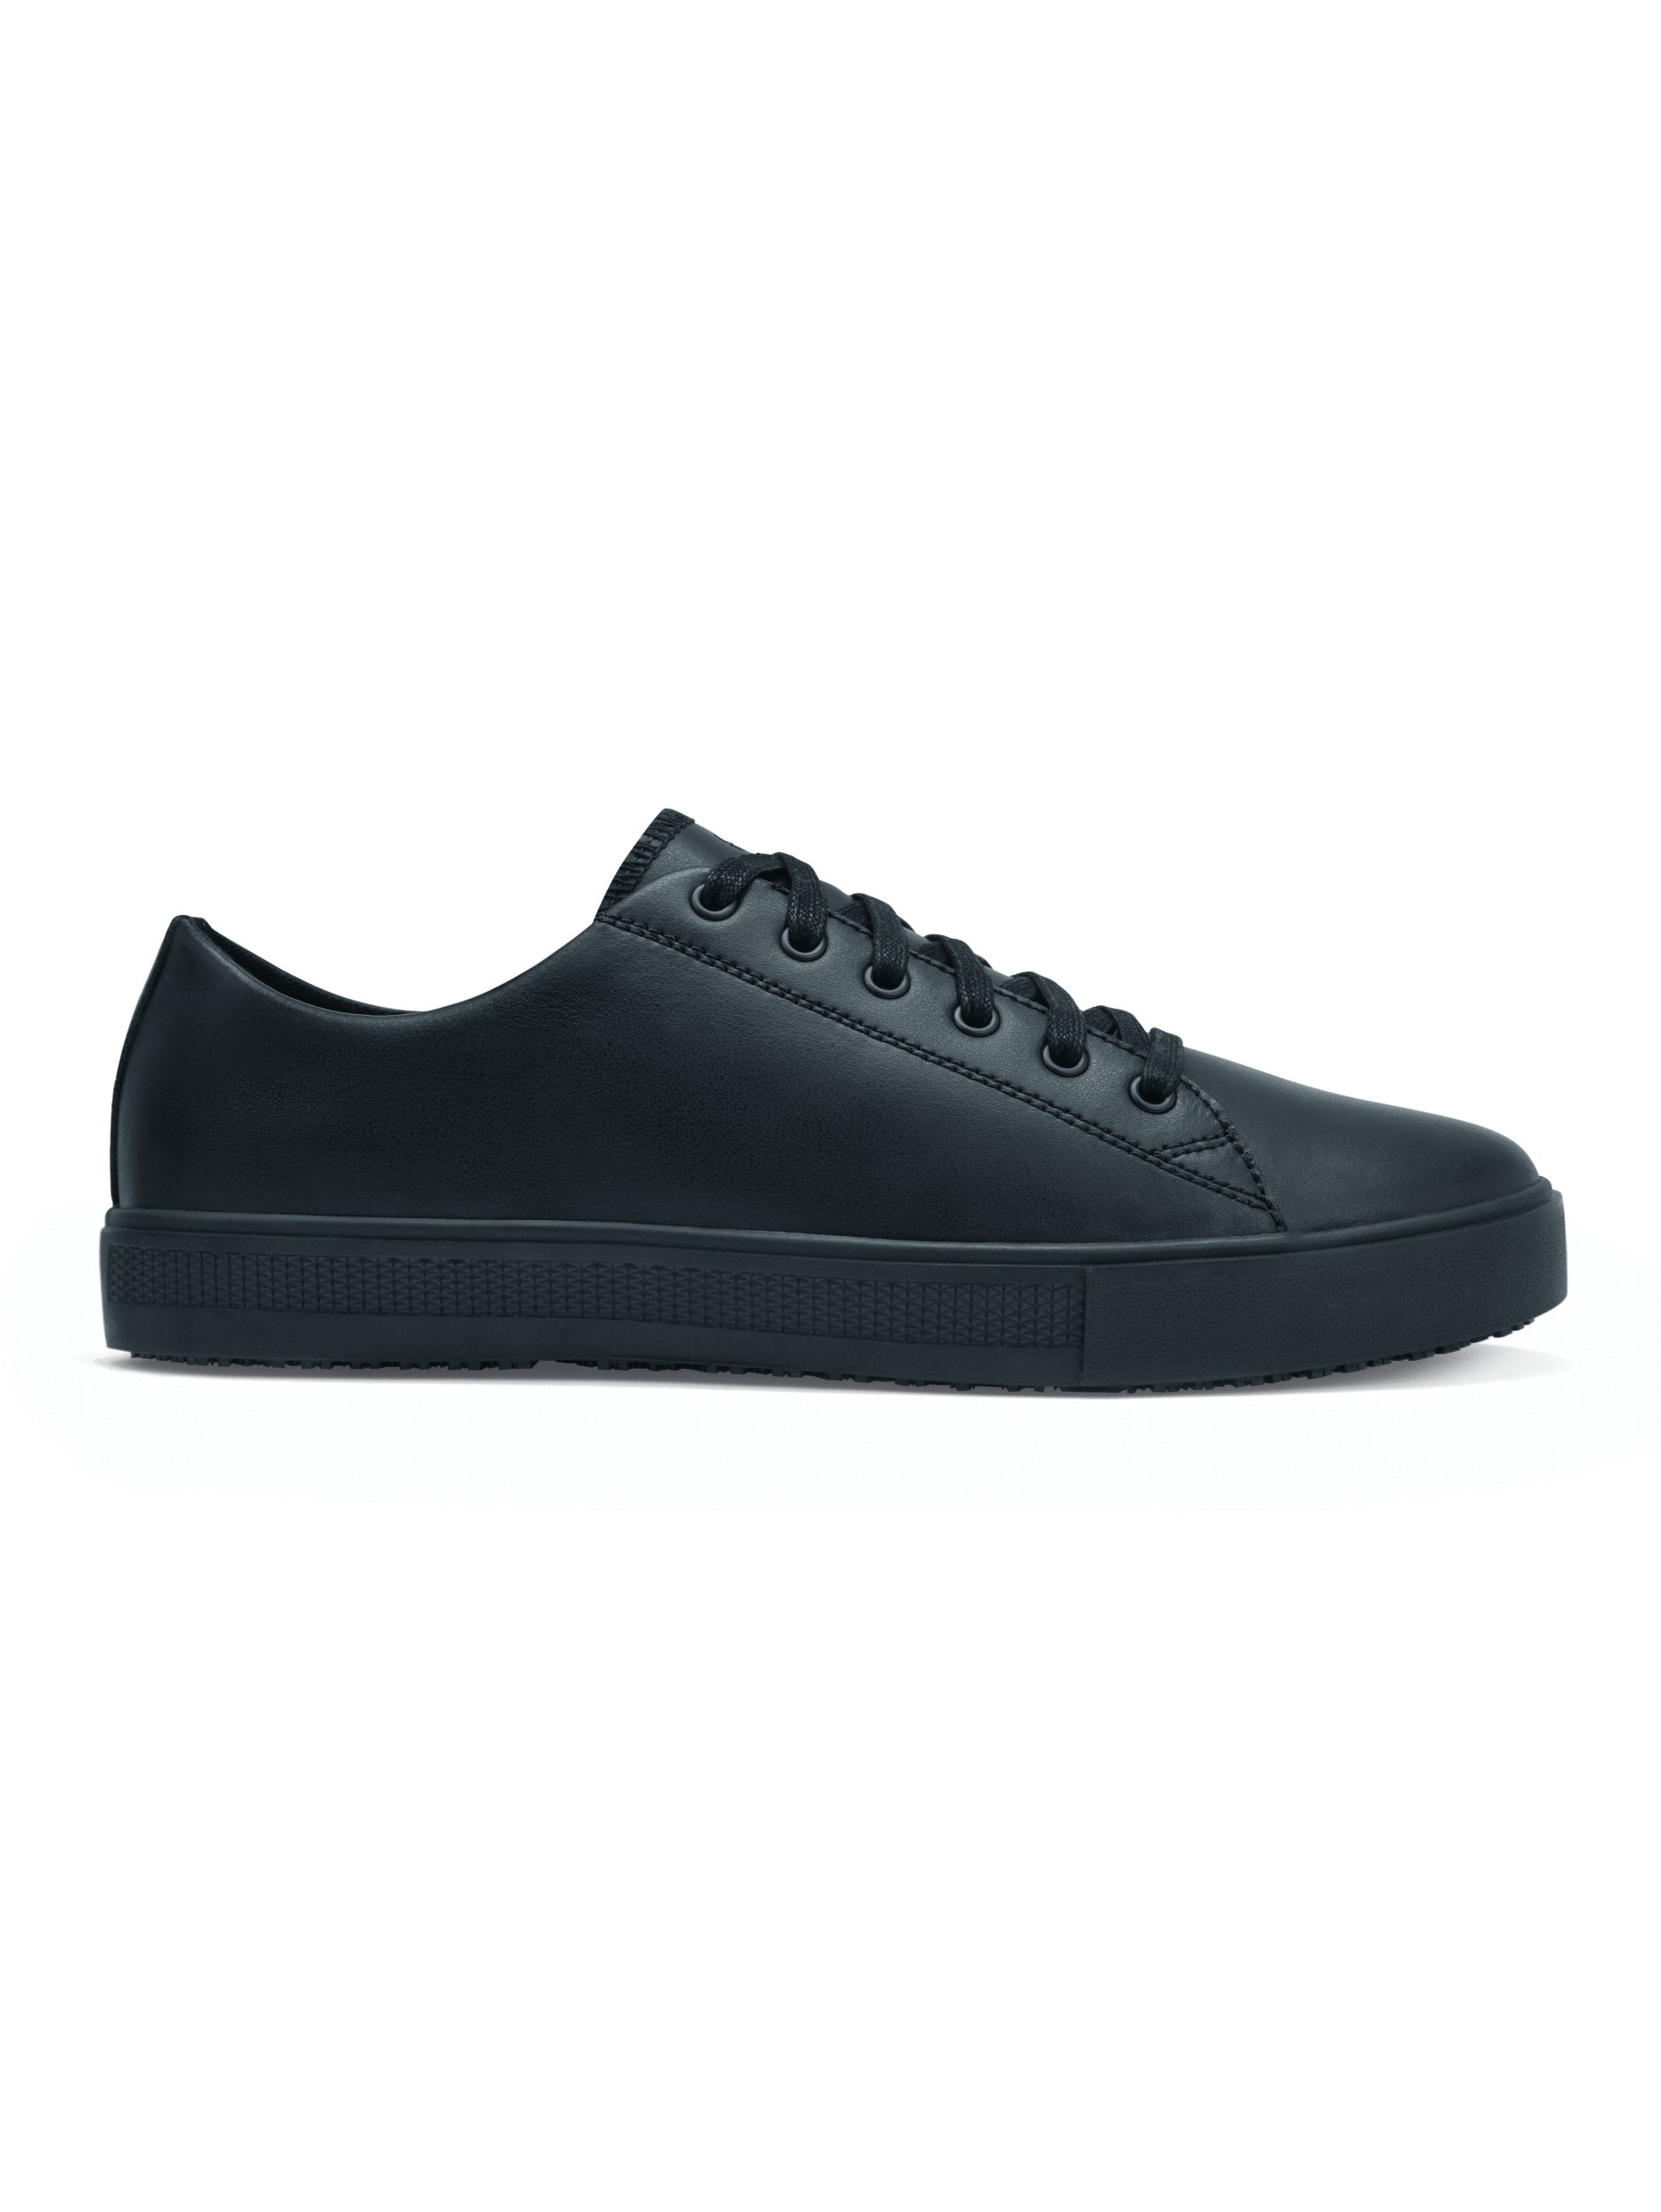 Unisex Work Shoe Old School Low Rider Iv Black by  Shoes For Crews.